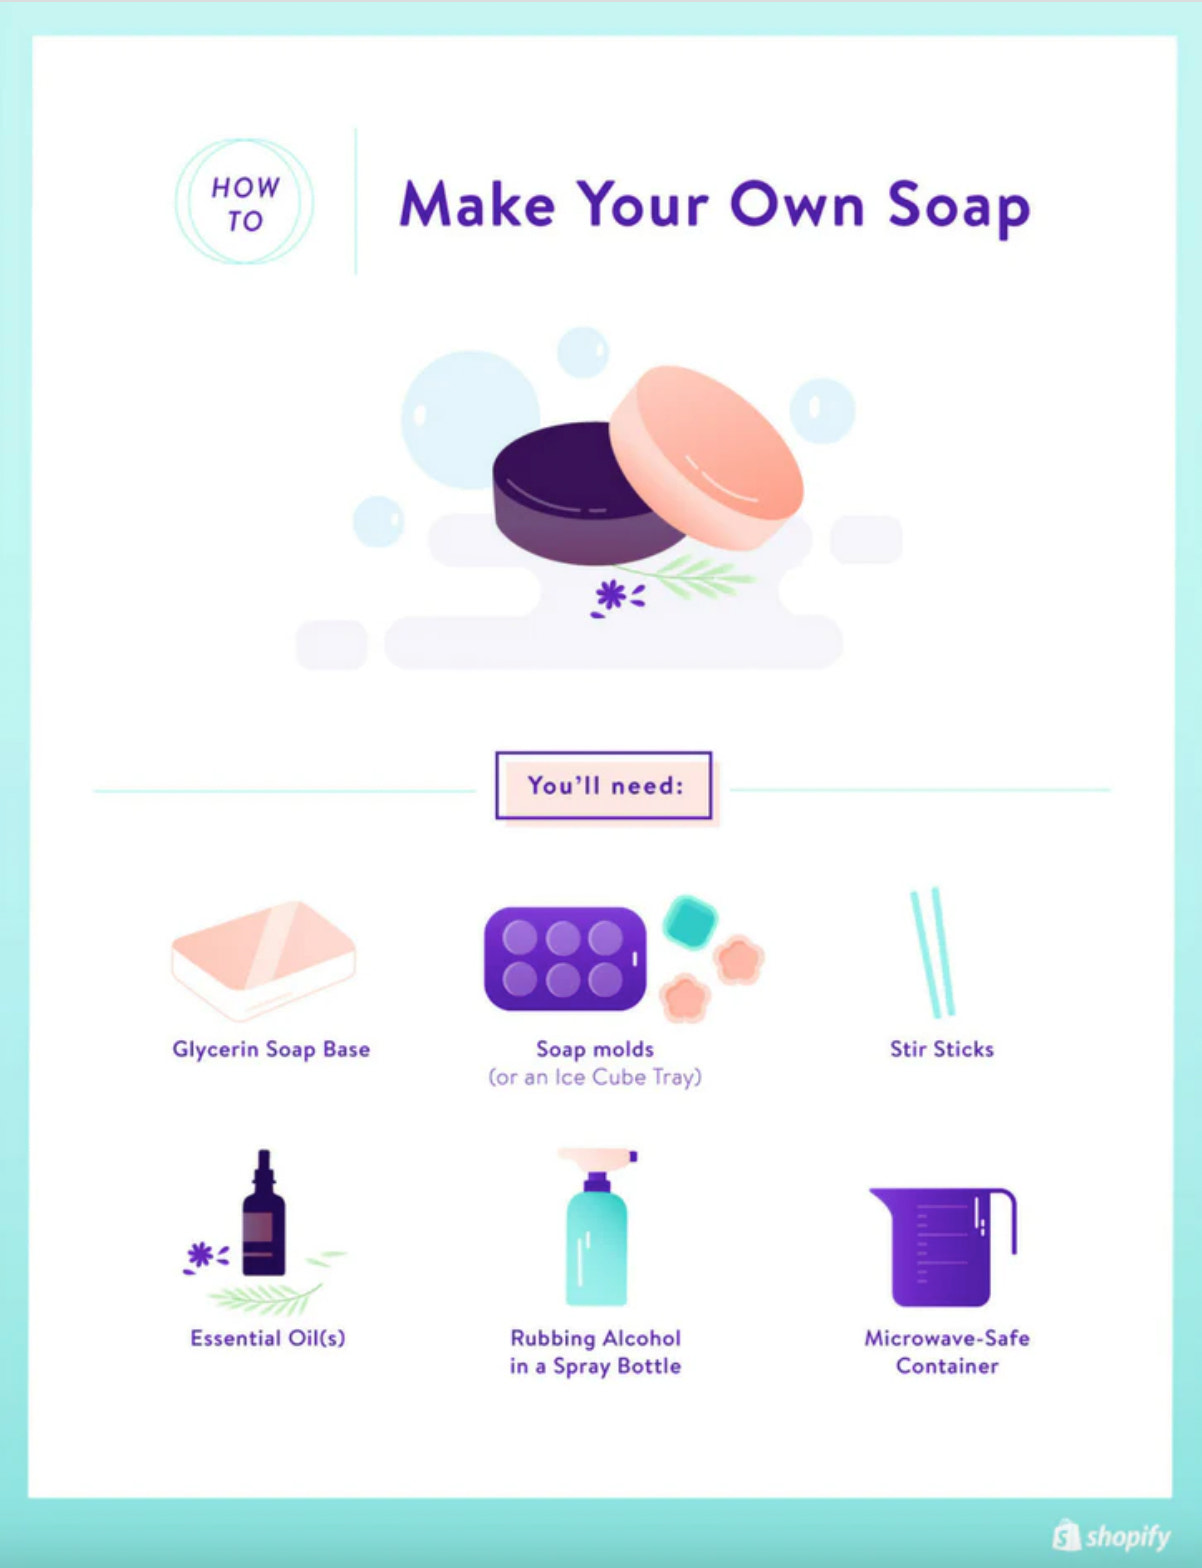 The essential guide to soap making at home - Gathered